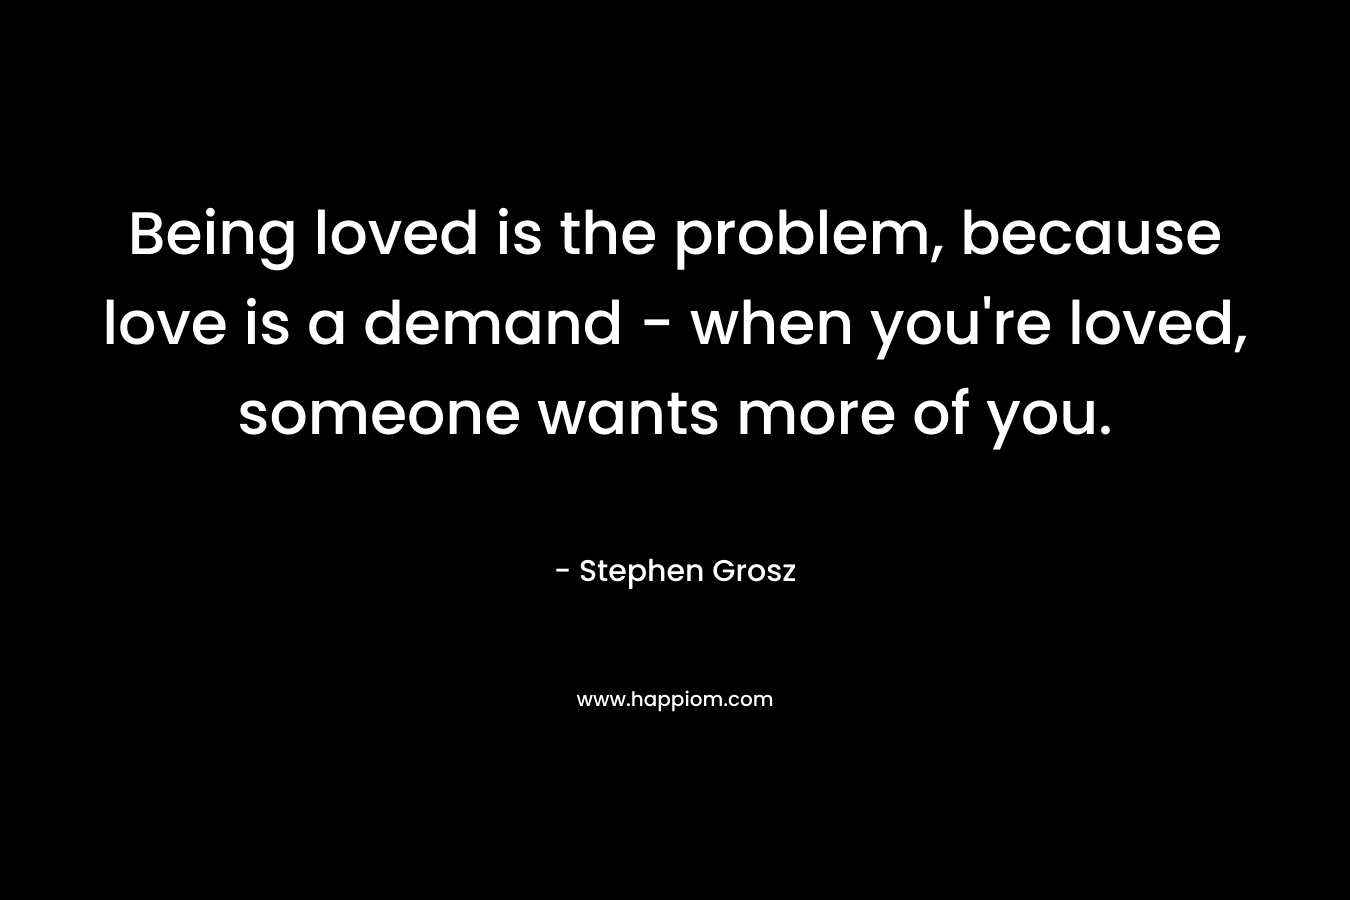 Being loved is the problem, because love is a demand – when you’re loved, someone wants more of you. – Stephen Grosz